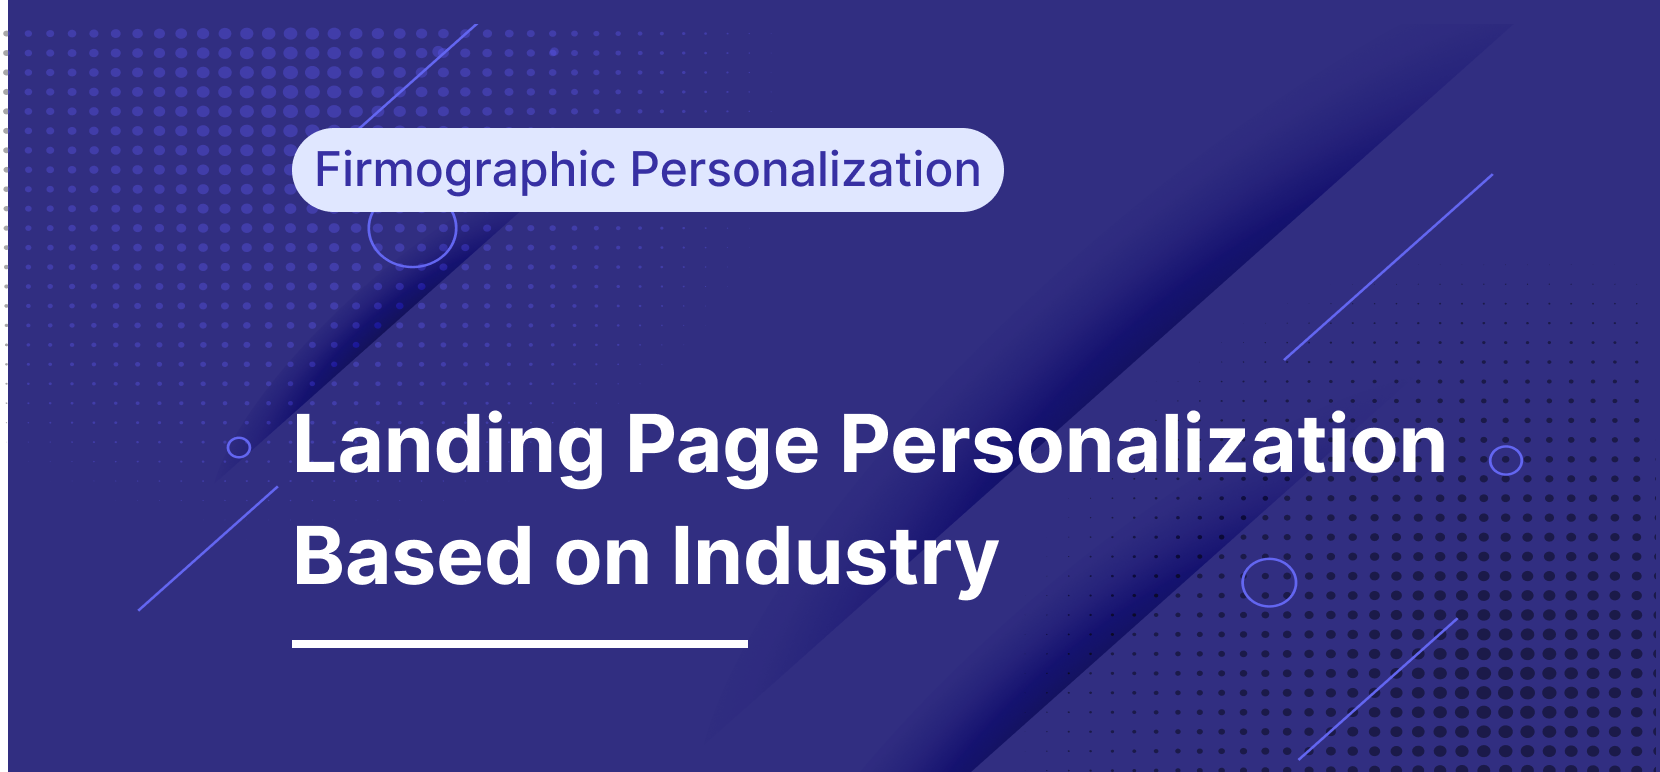 How to Personalize the Landing Page Experience Based on Industry